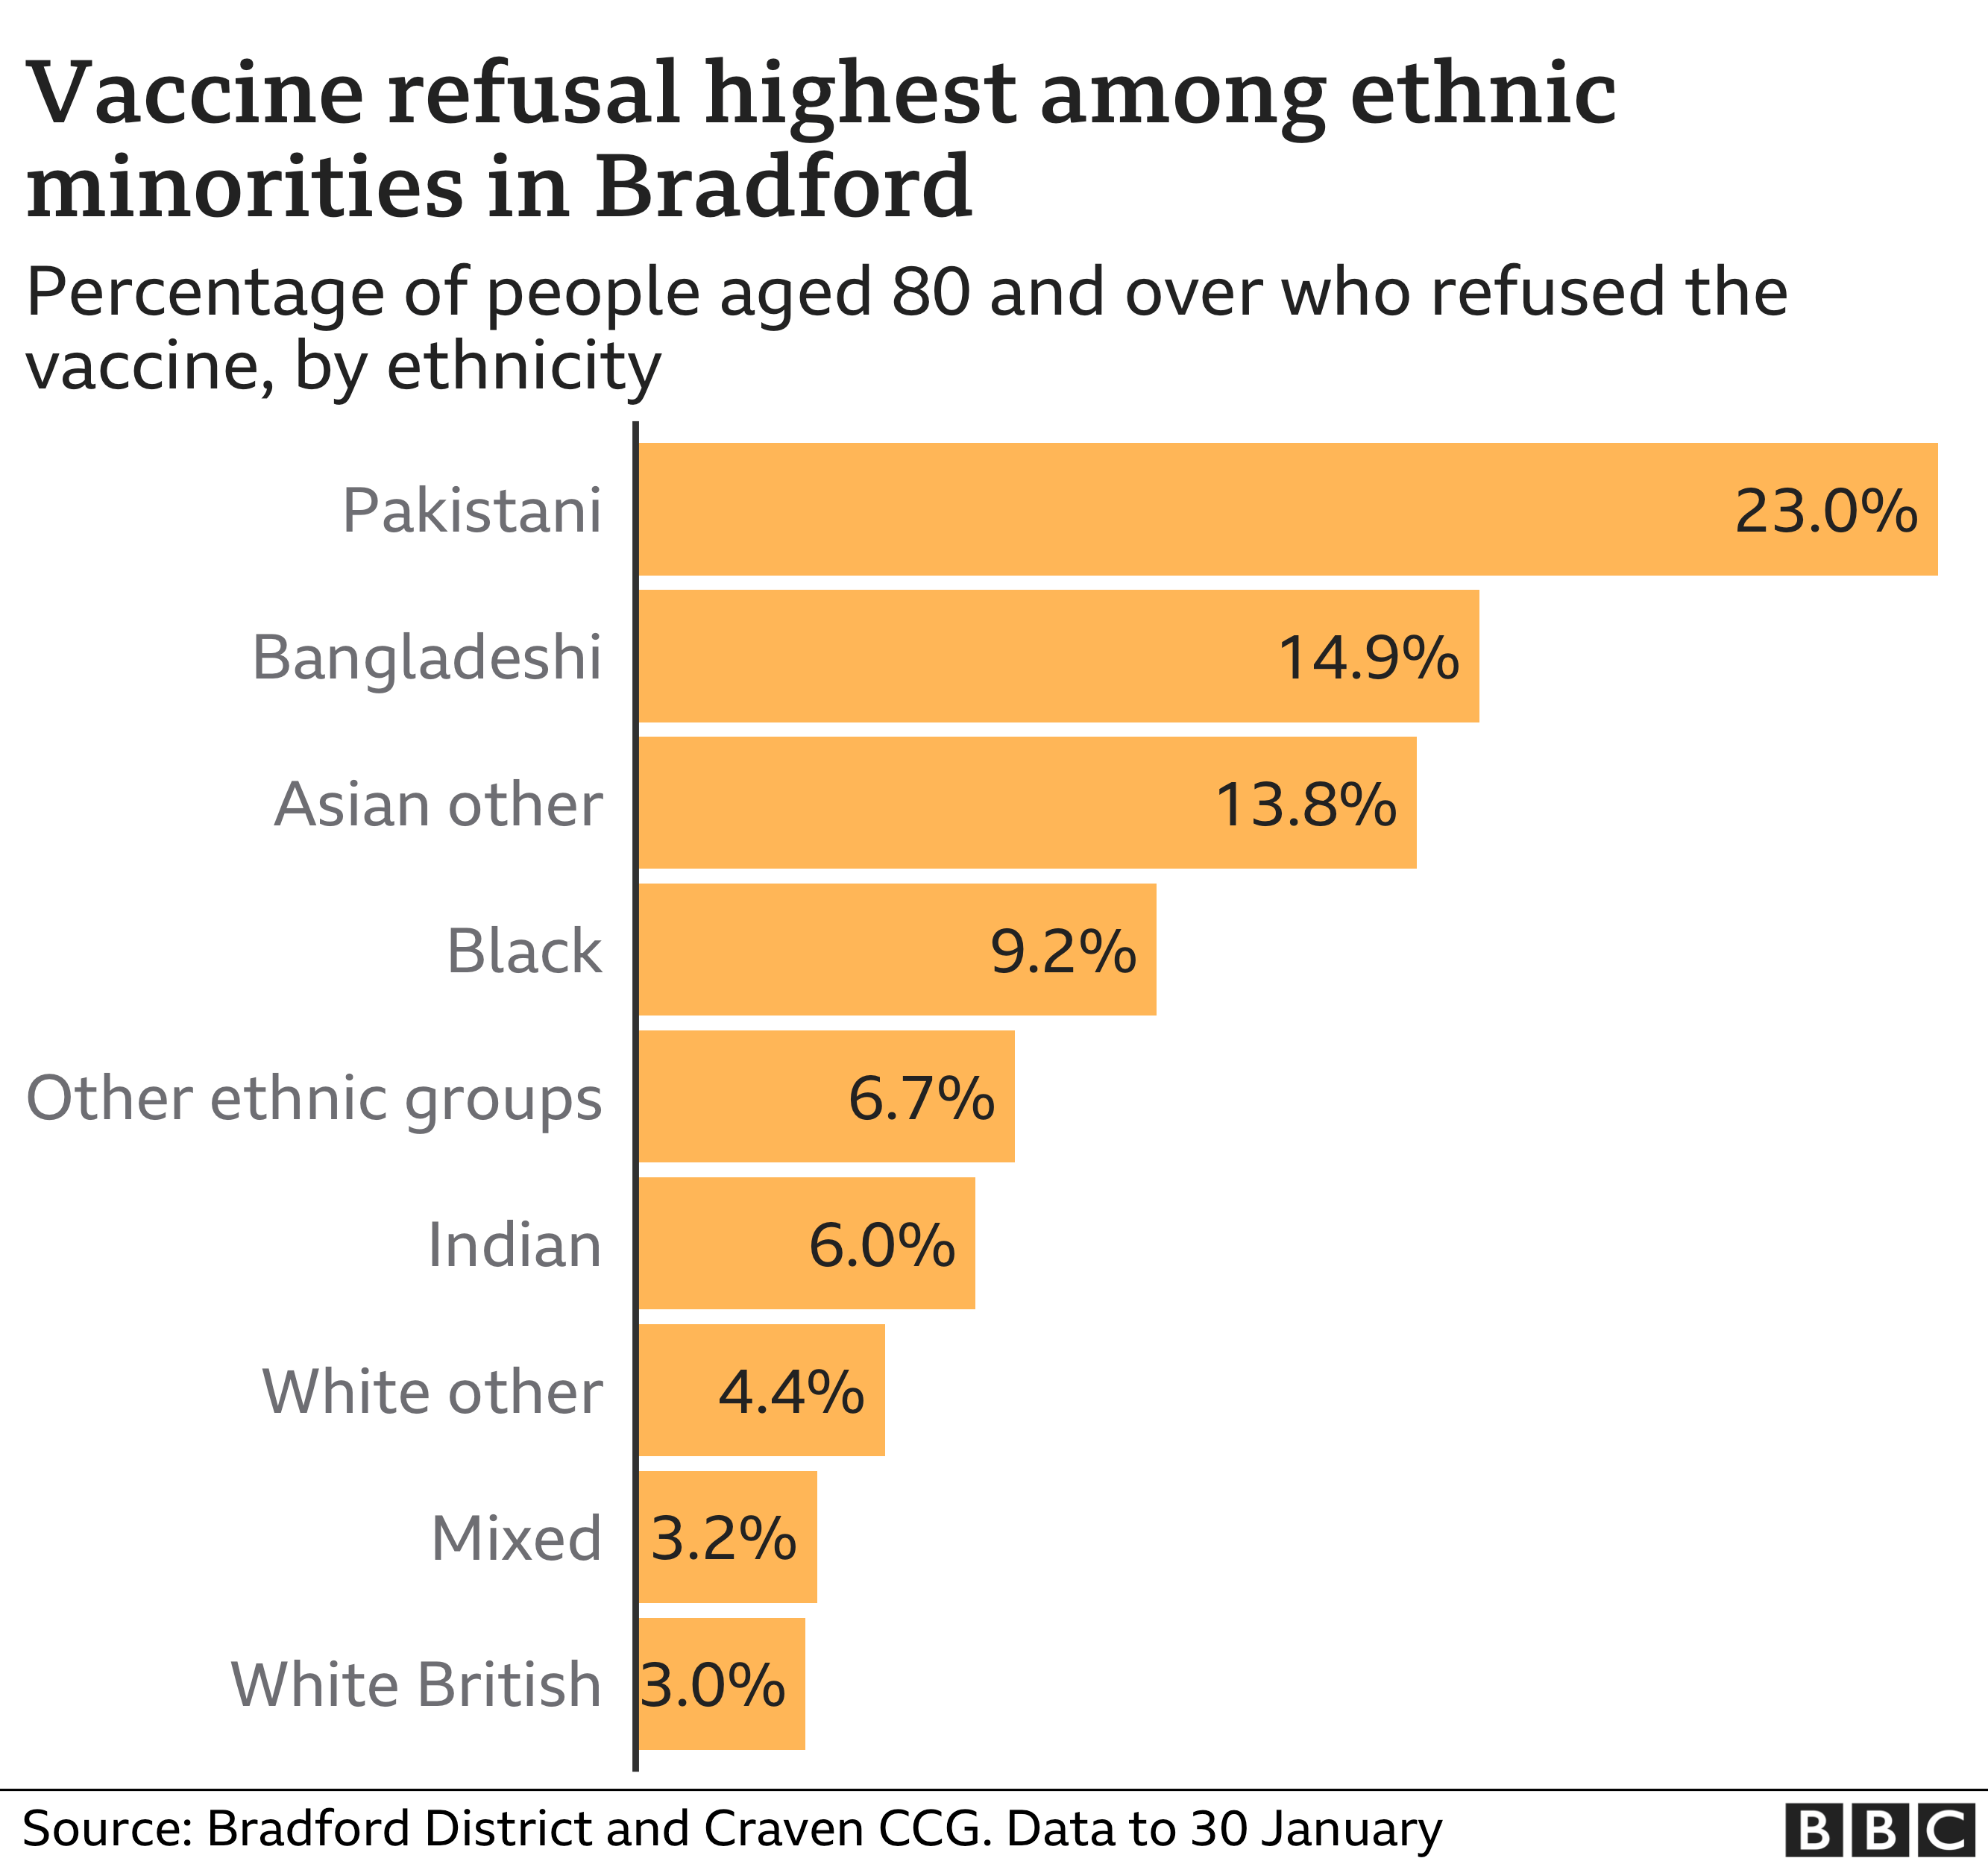 Chart showing vaccine refusal rates in Bradford, by ethnicity